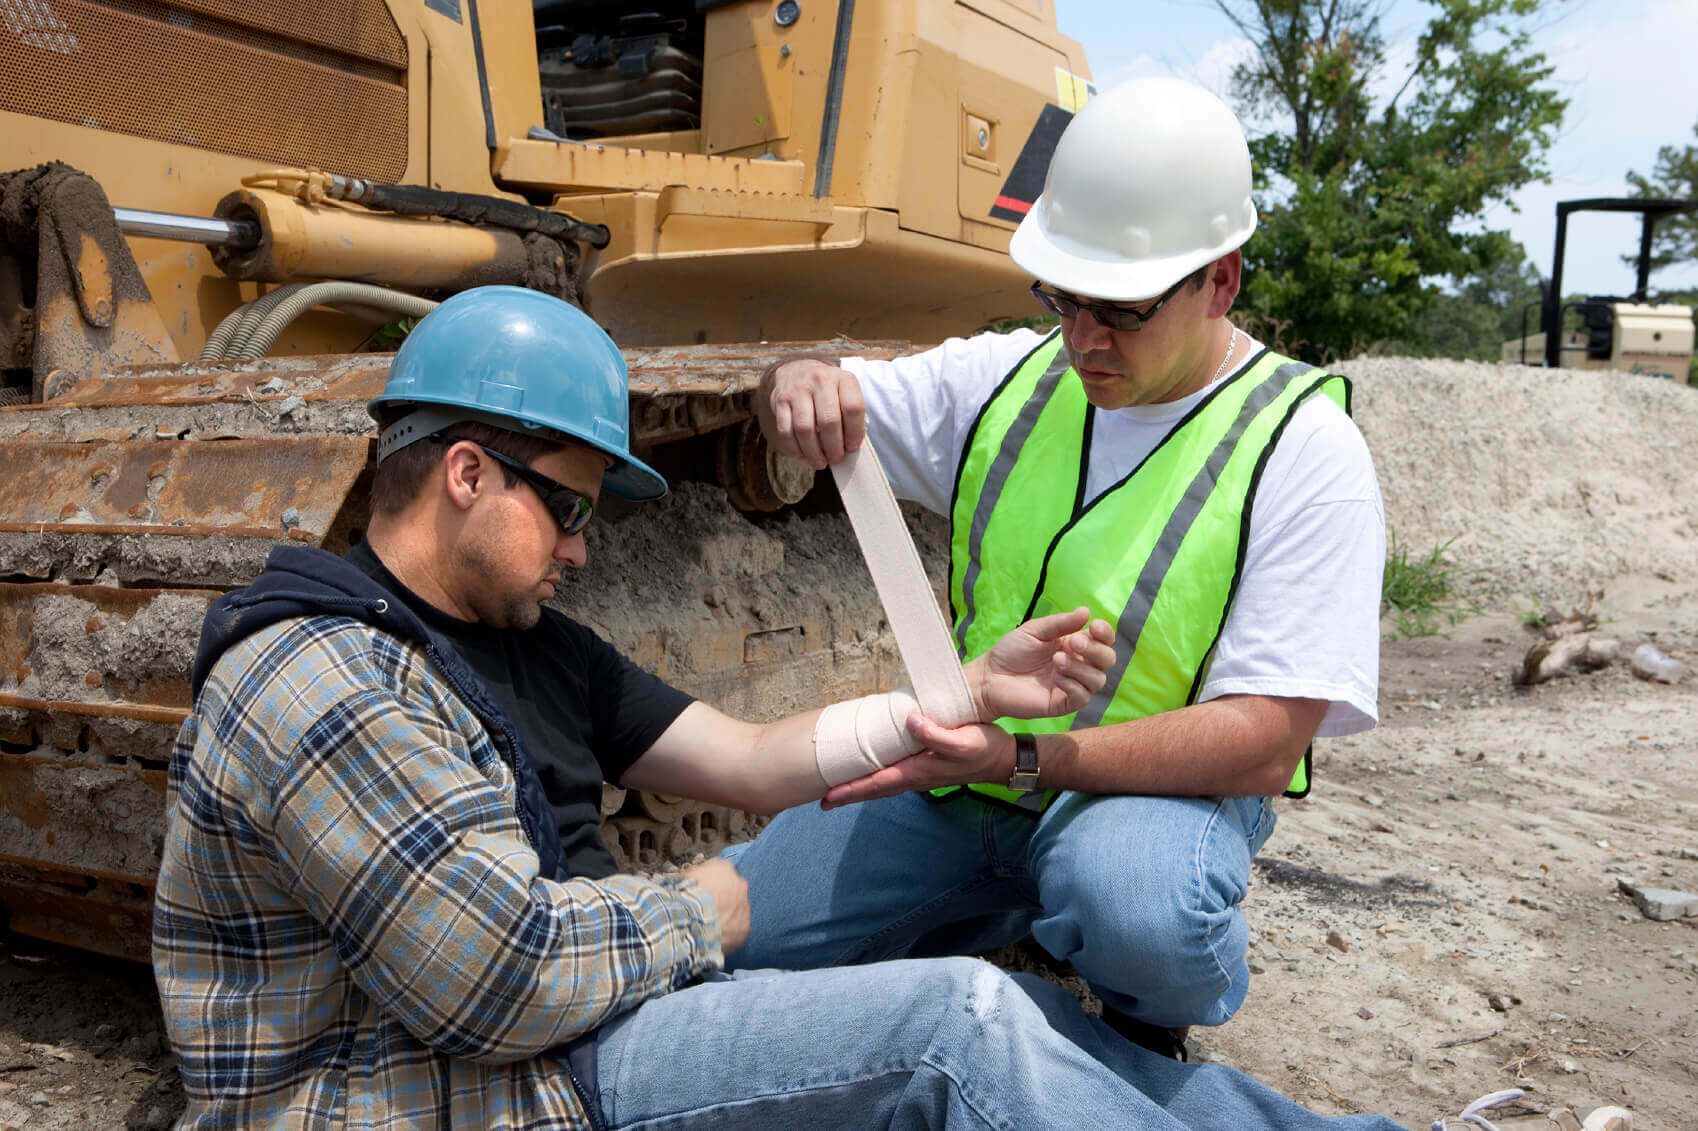 construction worker administering first aid on another worker after a workplace injury